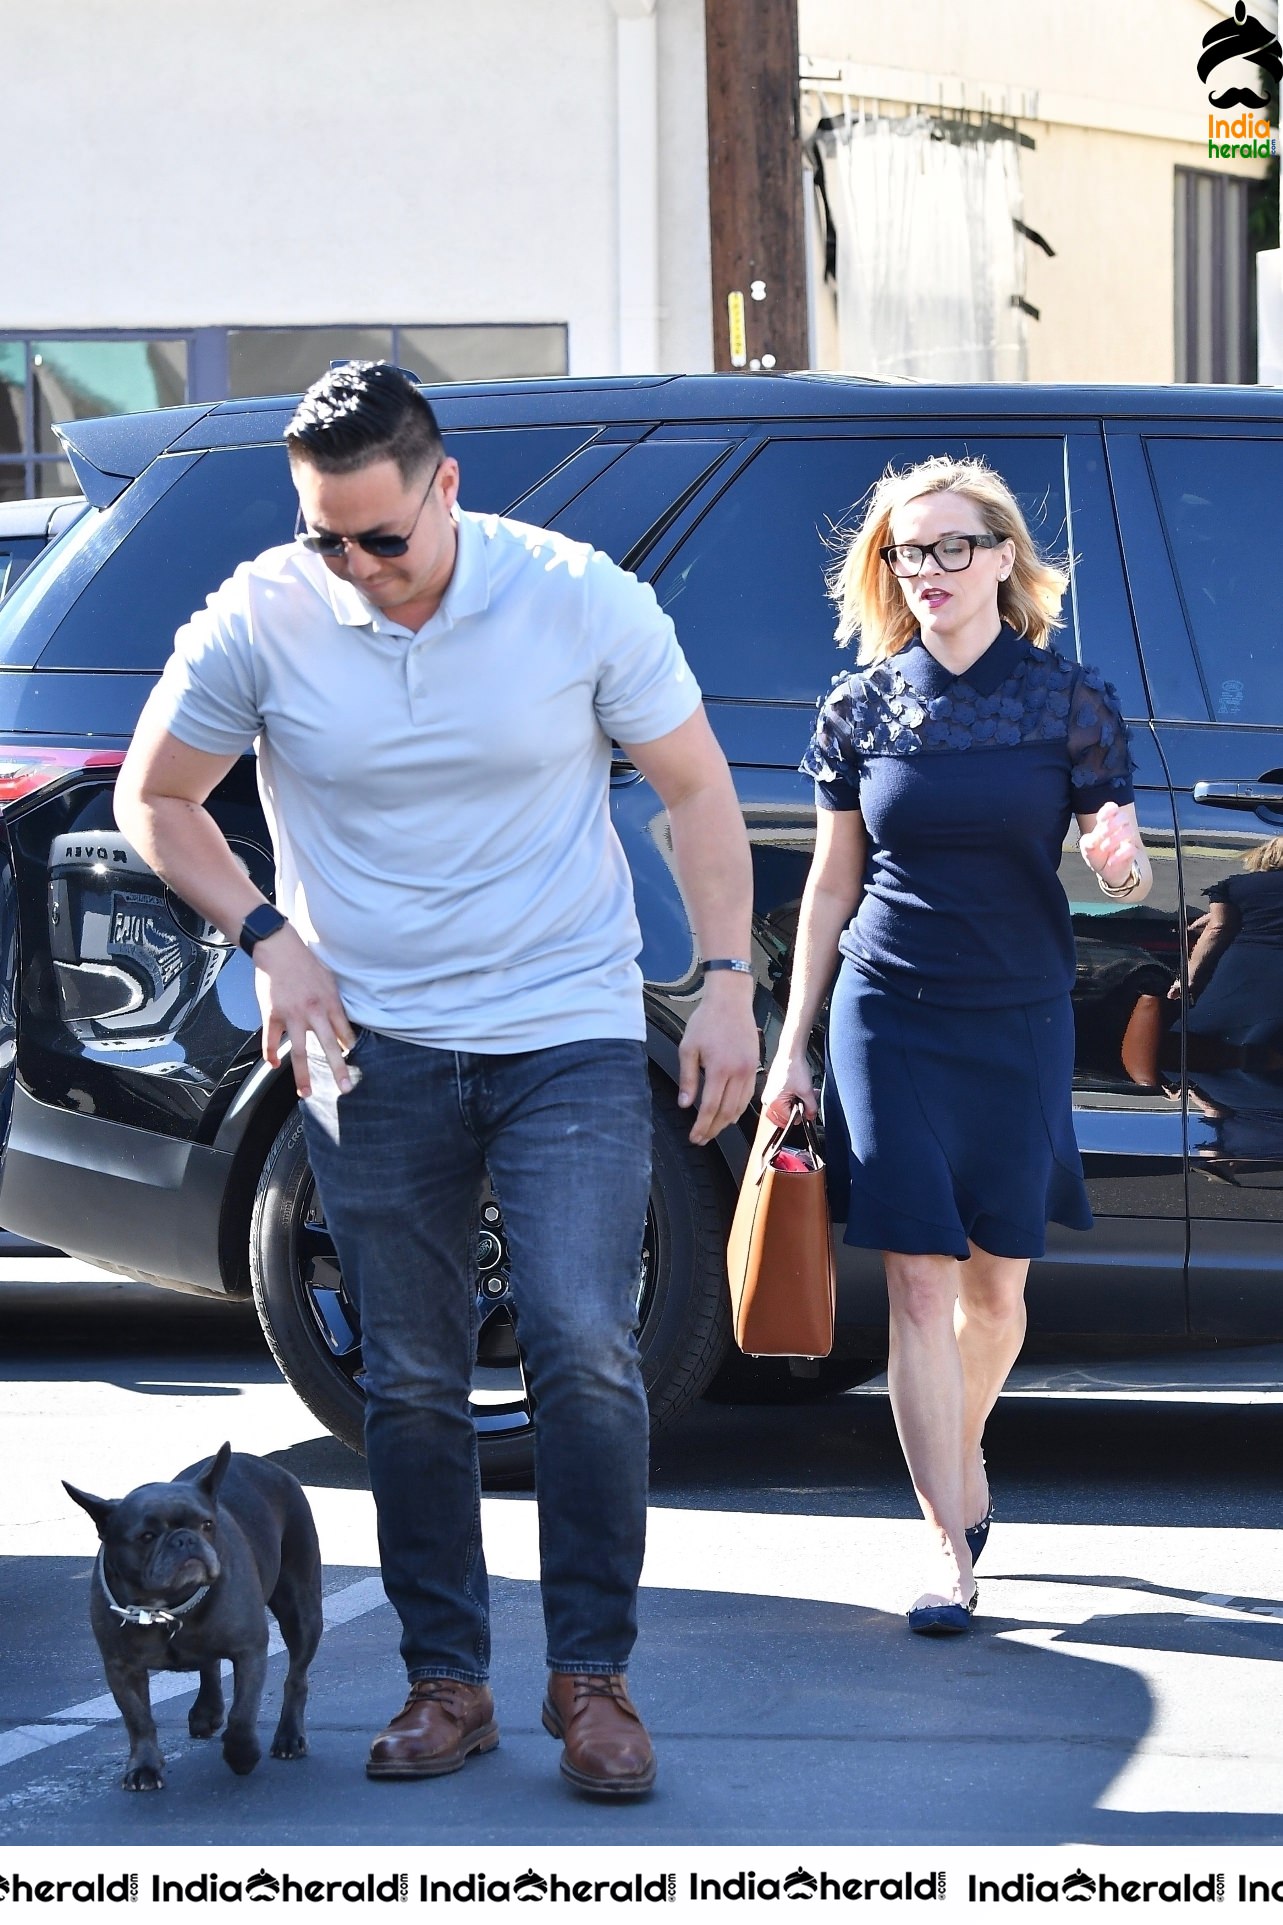 Reese Witherspoon caught by Paparazzi while out in Brentwood CA Set 1